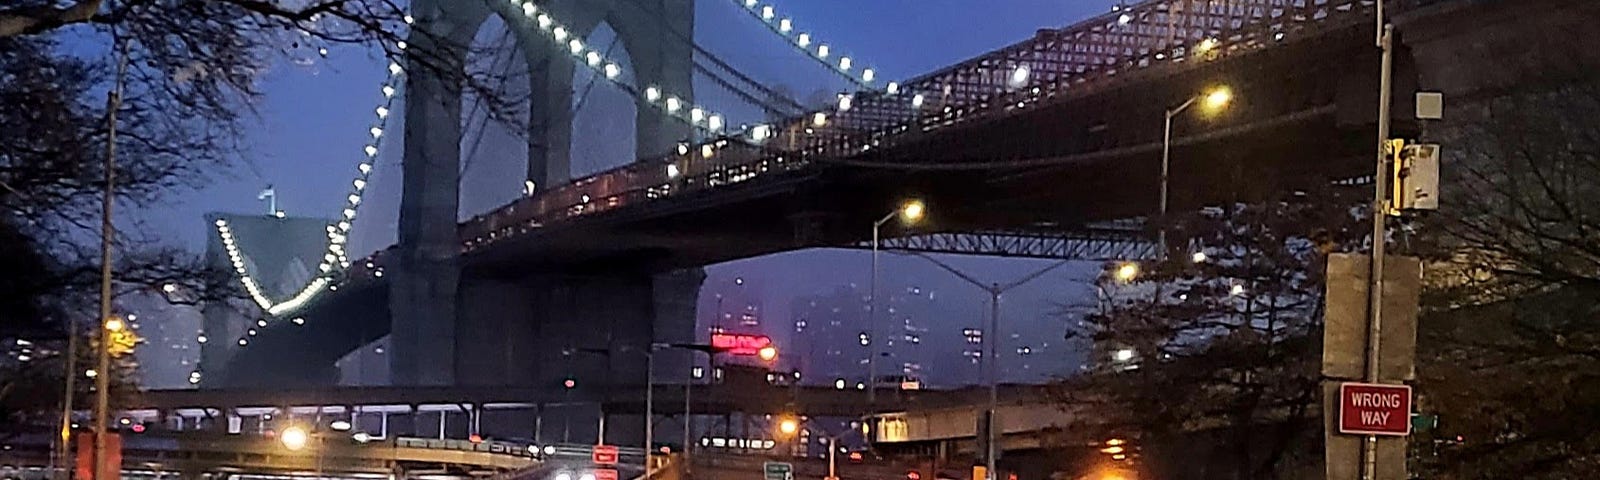 A photo of the Brooklyn Bridge taken from street level on the Manhattan Side of the bridge